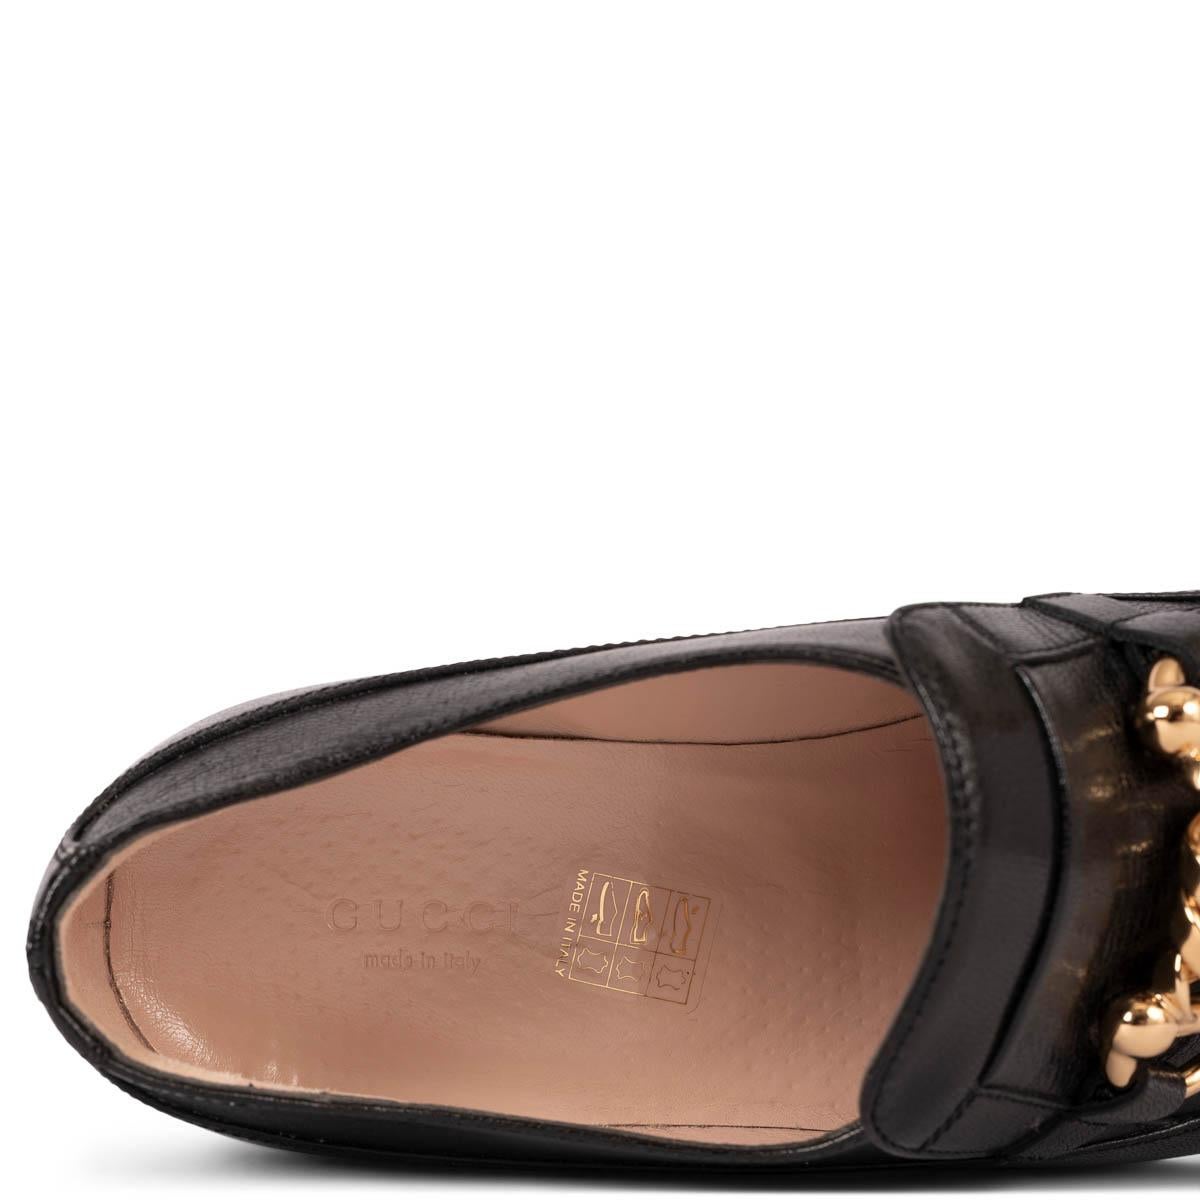 GUCCI black leather ICE LOLLY Loafers Shoes 39 For Sale 3